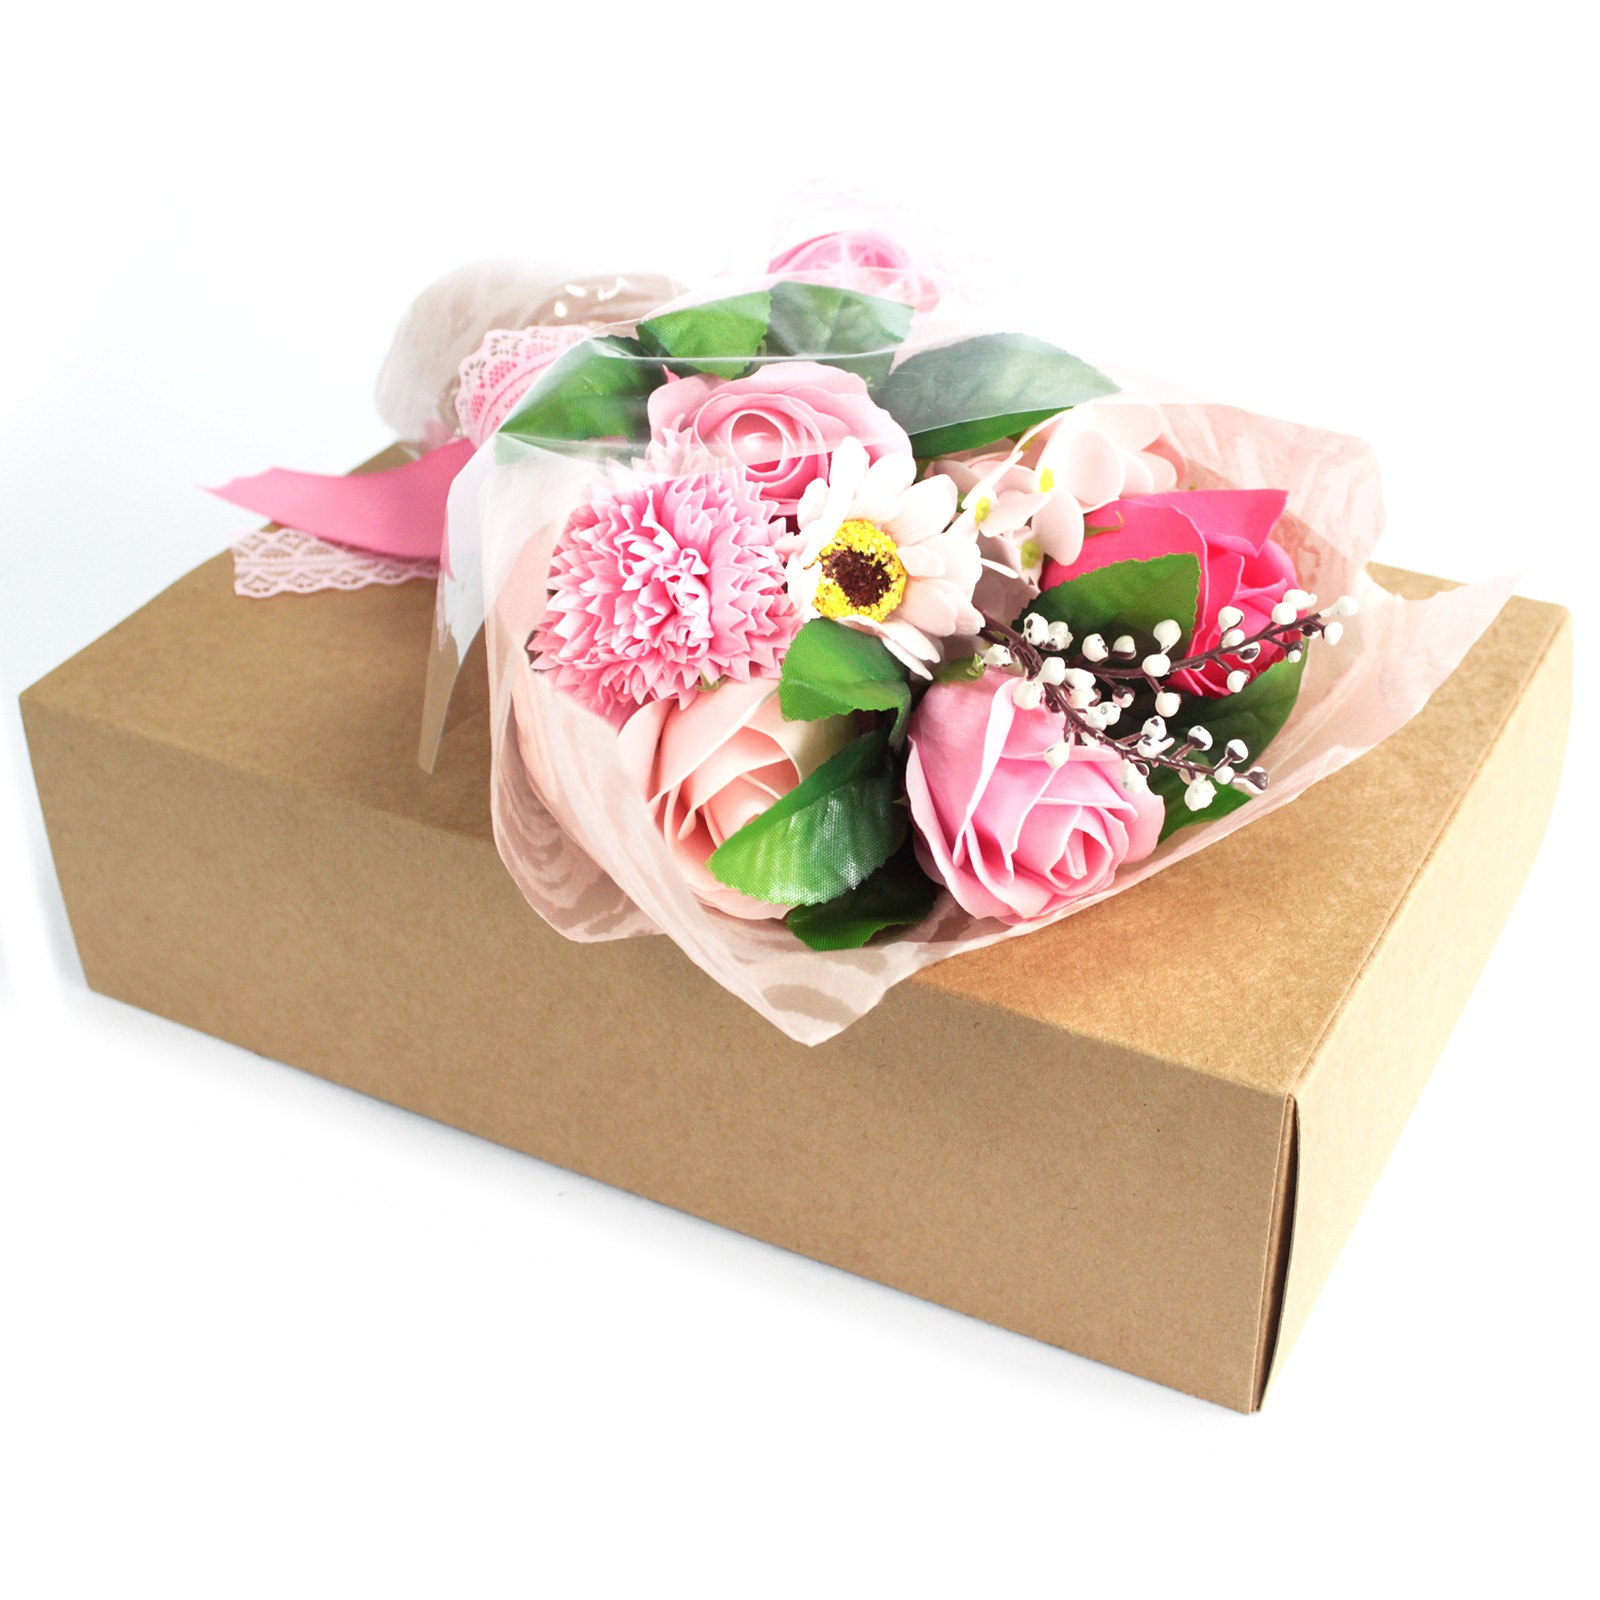 Boxed Hand Soap Flower Bouquet - Pink